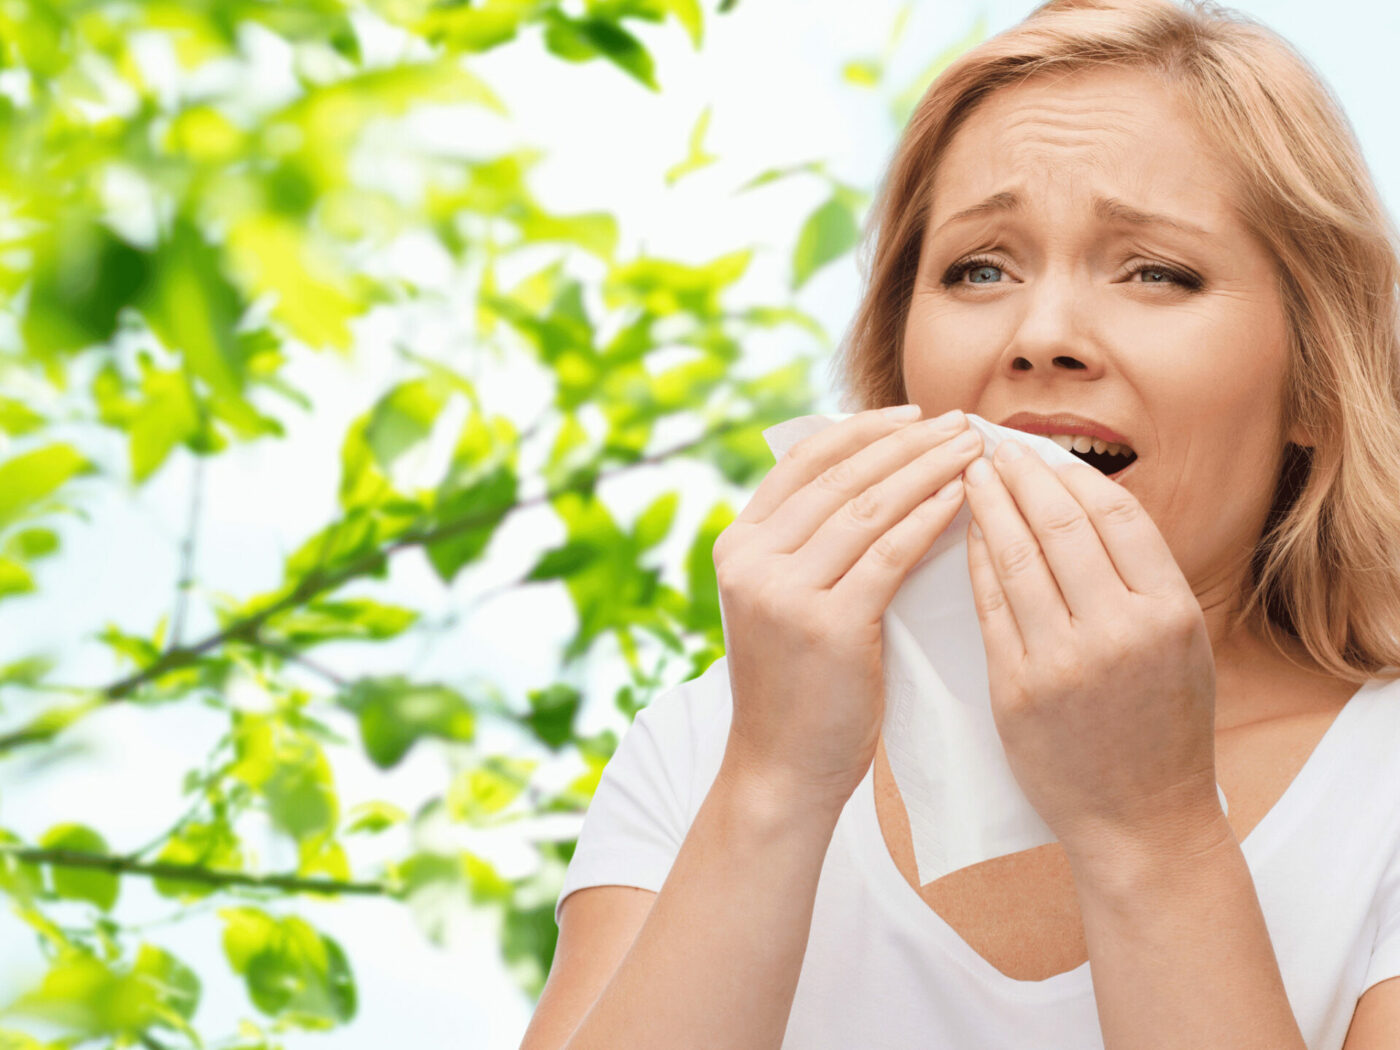 Woman sneezing in front of tree with handkerchief in hand